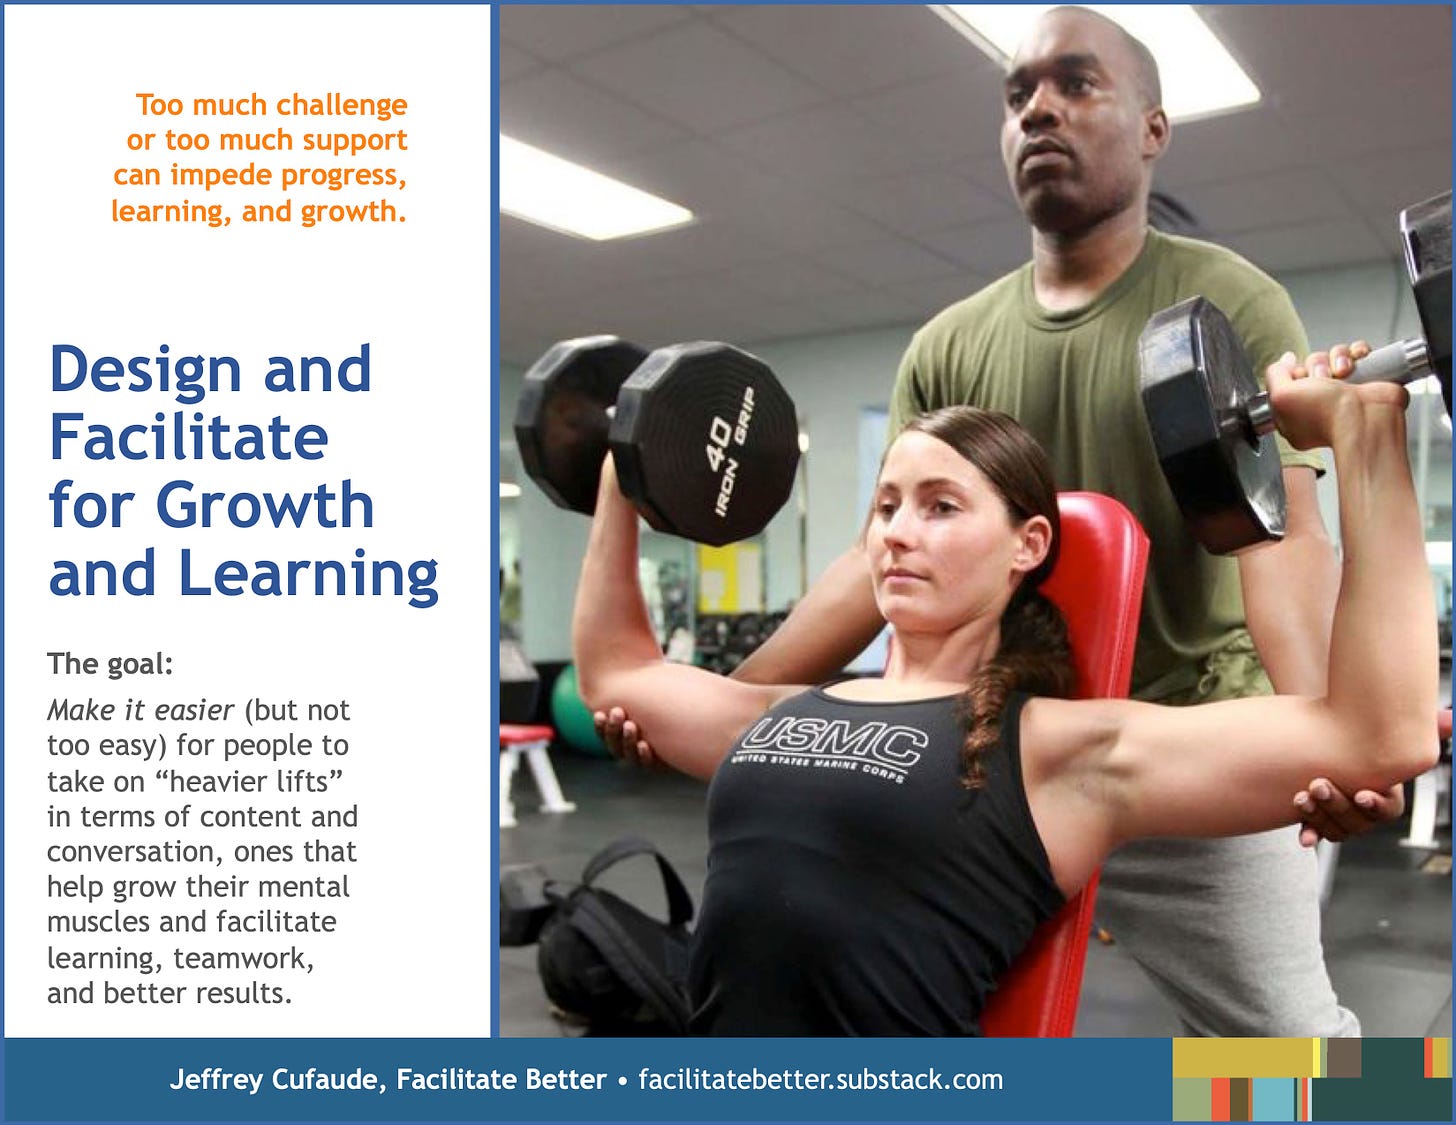 A young white female in workout attire is seating upright on a workout bench and is doing dumbbell shoulder presses with a 40 pound dumbbell in each hand.  Behind her stands a young African-American male with his hands beneath her arms, spotting her as she attempts to press the dumbbells above her head.  Headline to the left of this image: Design and Facilitate for Growth and Learning  Text above headline: Too much challenge or too much support can impede progress, learning, and growth.  Text below headline:  The goal: Make it easier (but not too easy) for people to take on “heavier lifts” in terms of content and conversation, ones that grow their mental muscles and facilitate learning, teamwork, and better results.